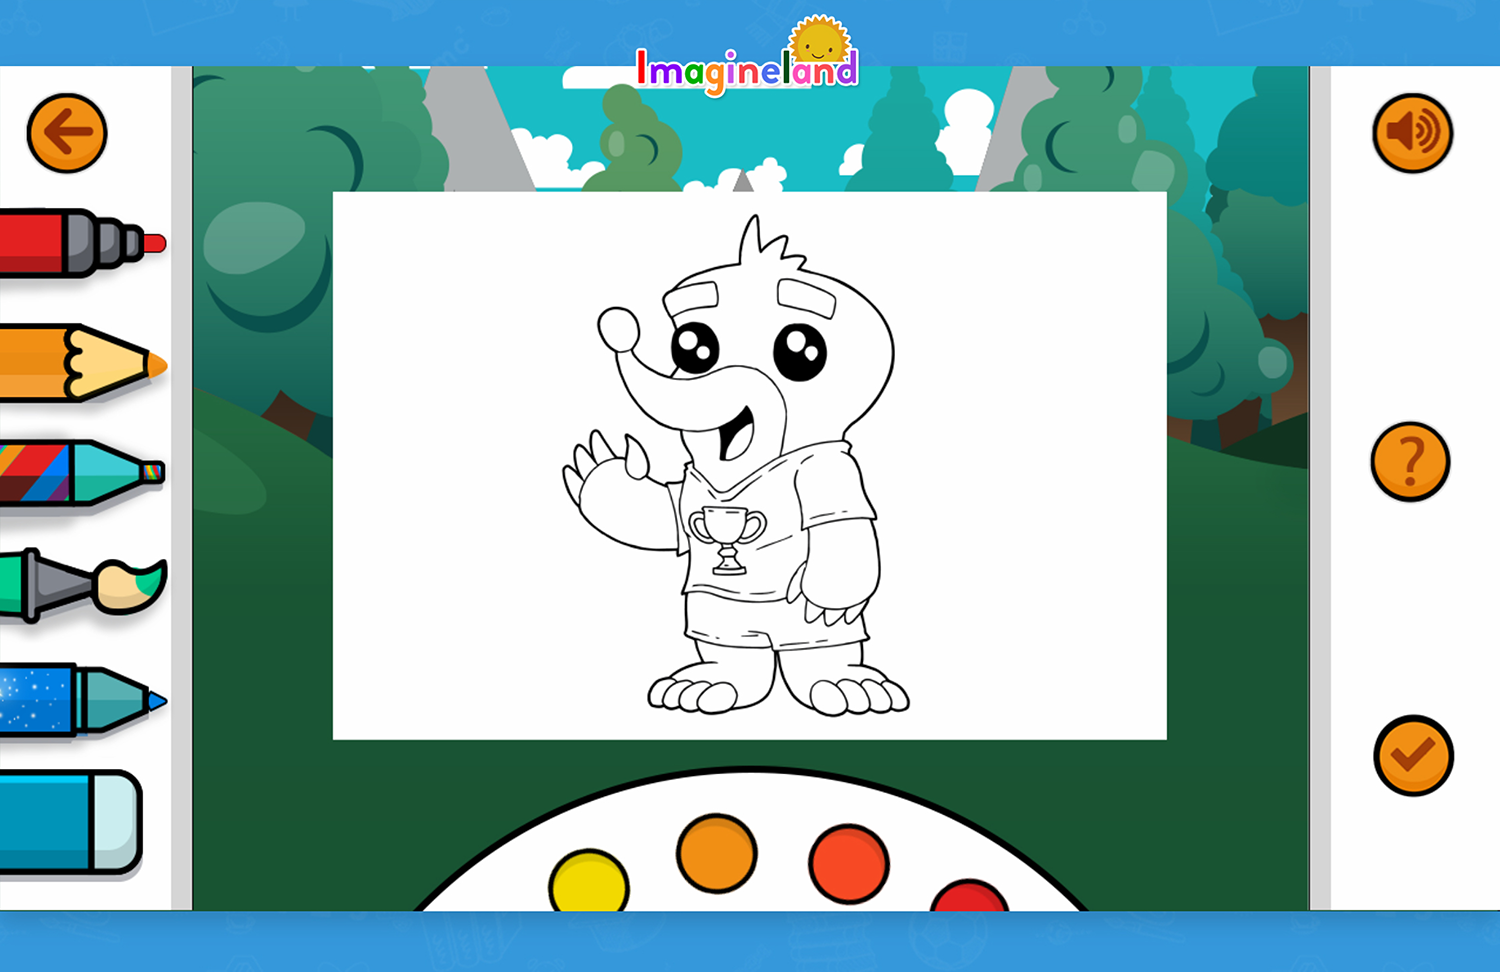 Black and white colouring picture of Roley Poley with pen selection to colour in with.